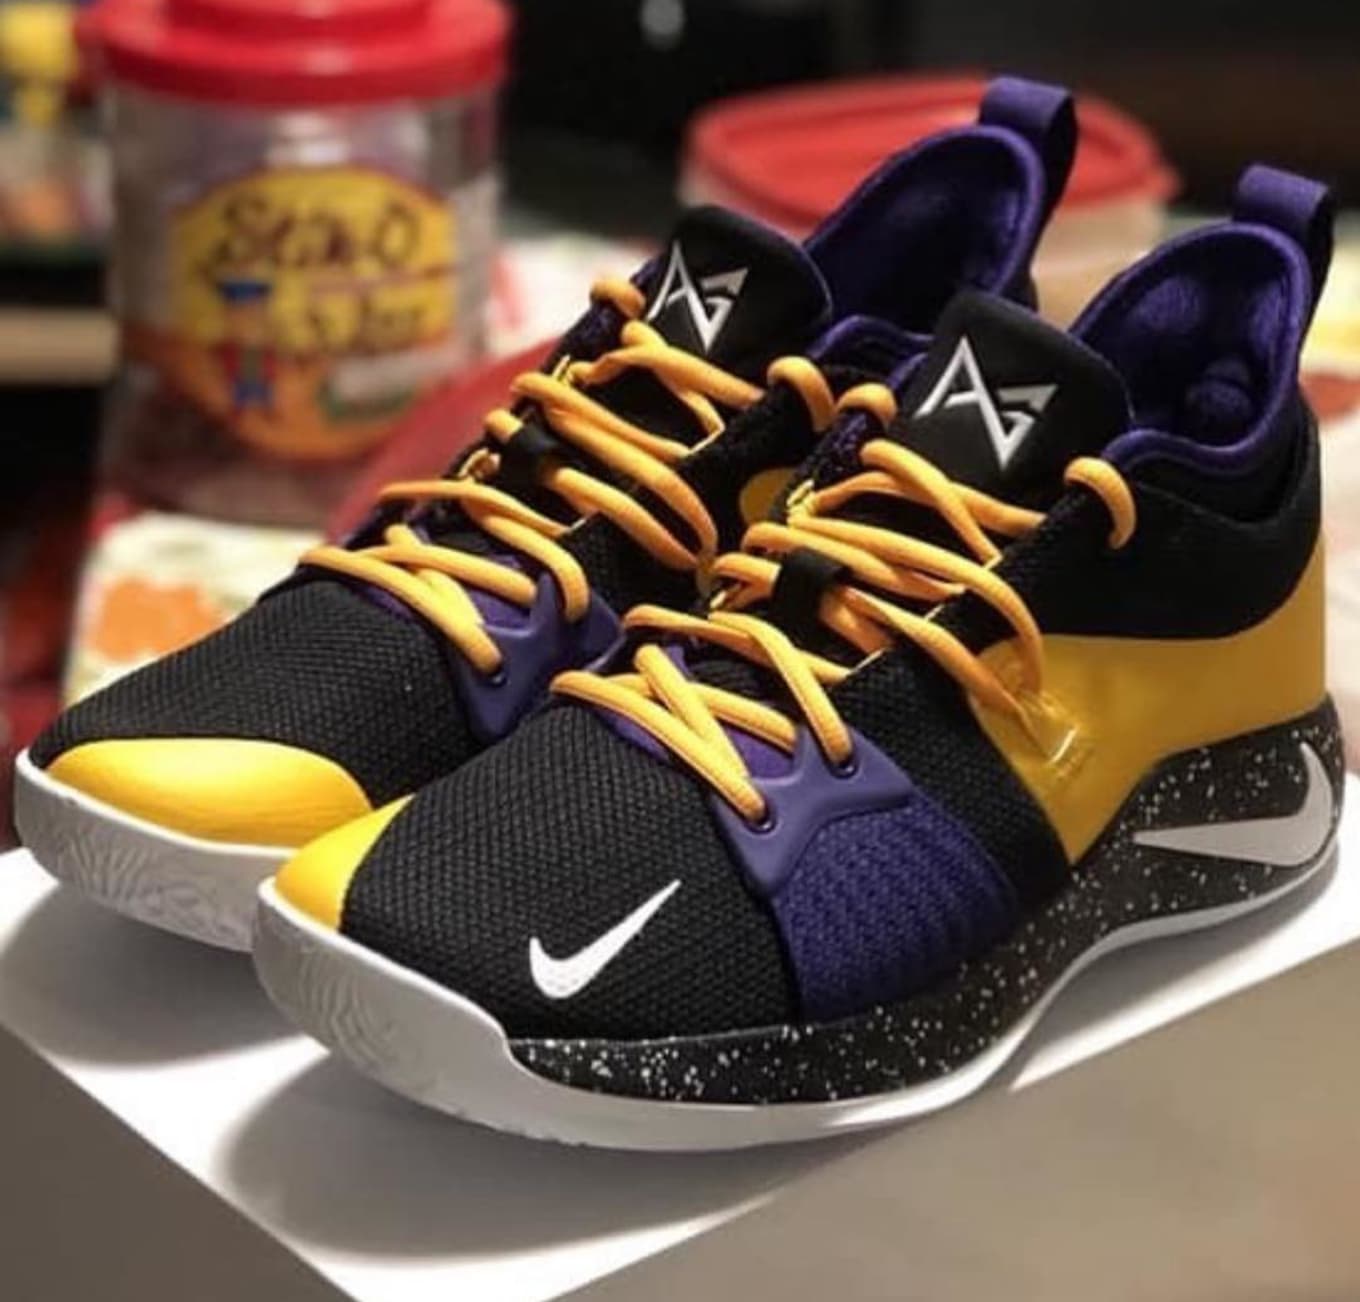 Nike By You NIKEiD PG 2 Designs | Sole 